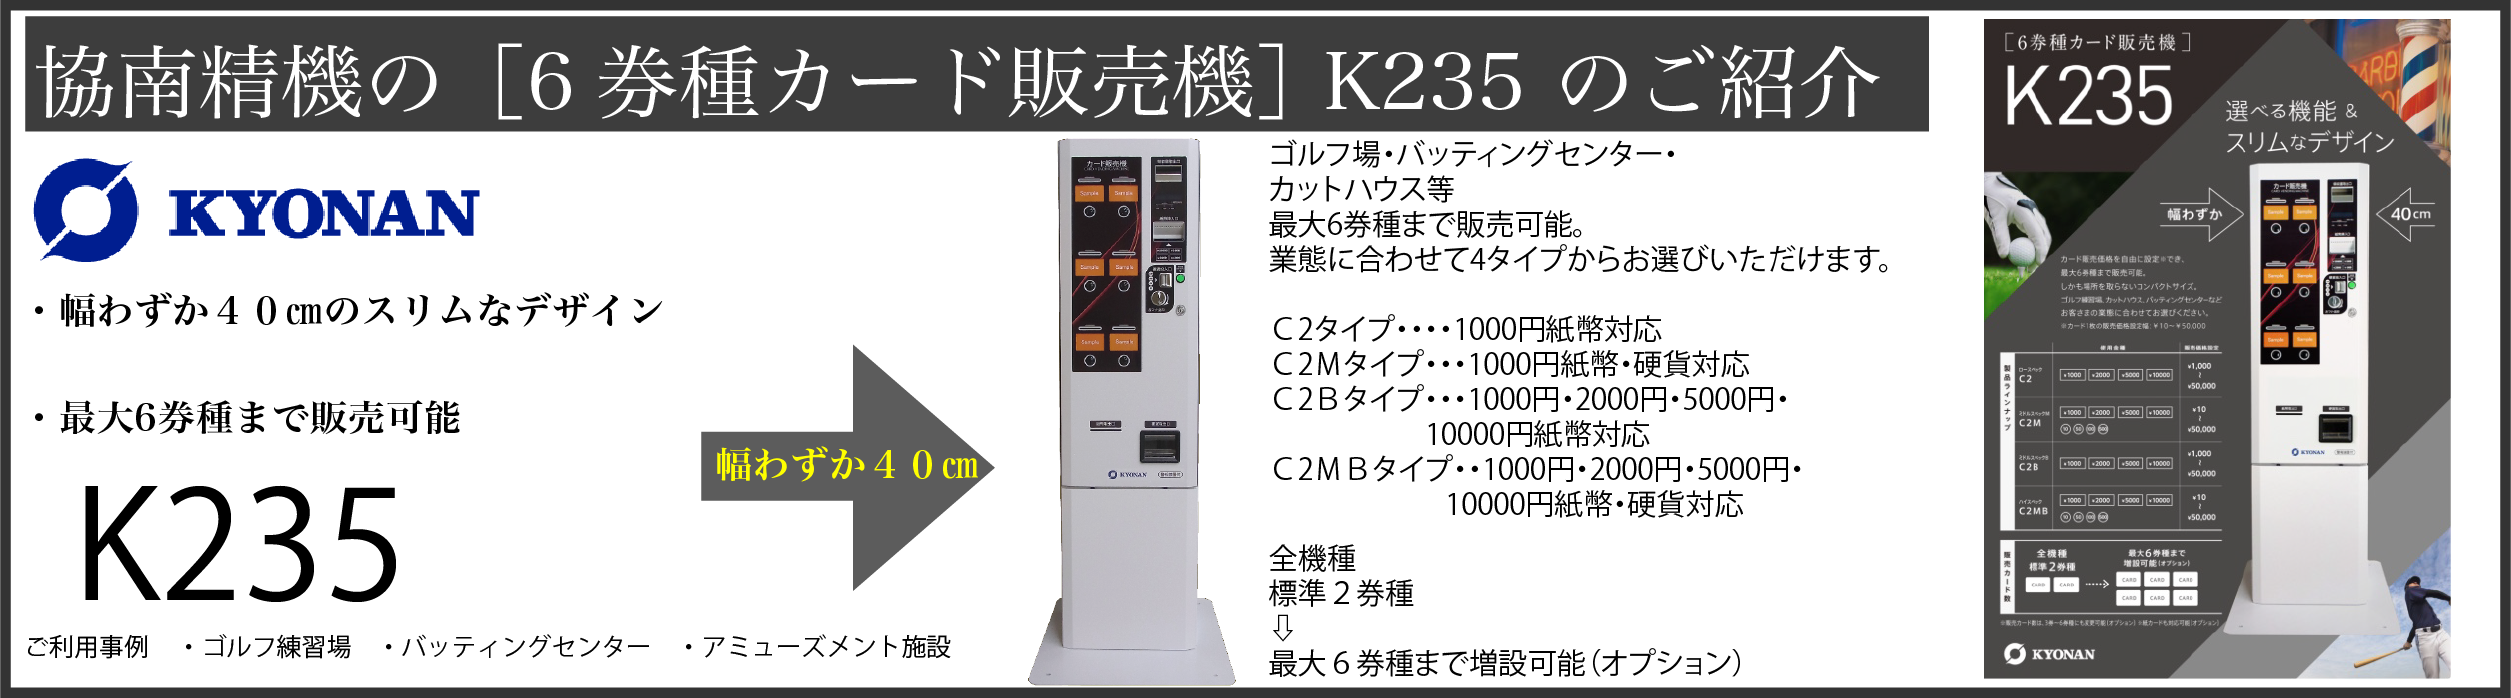 K235の案内バナー画像